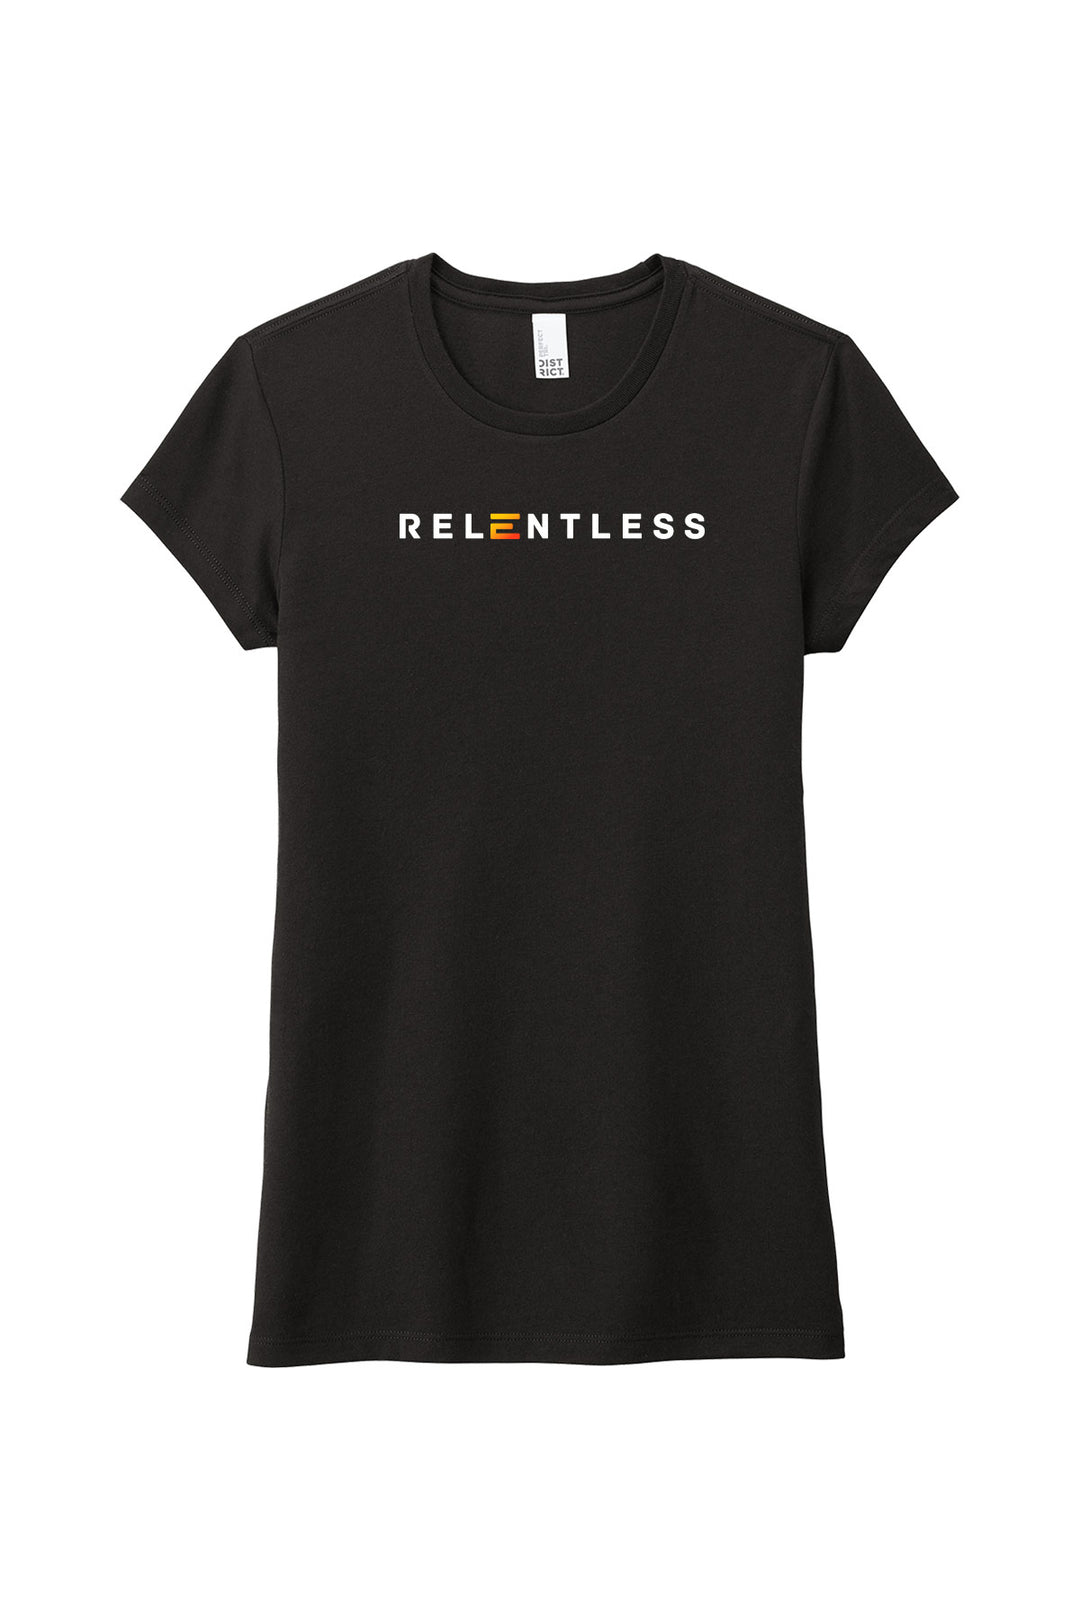 Ladies Fitted Perfect Tri Tee - Relentless